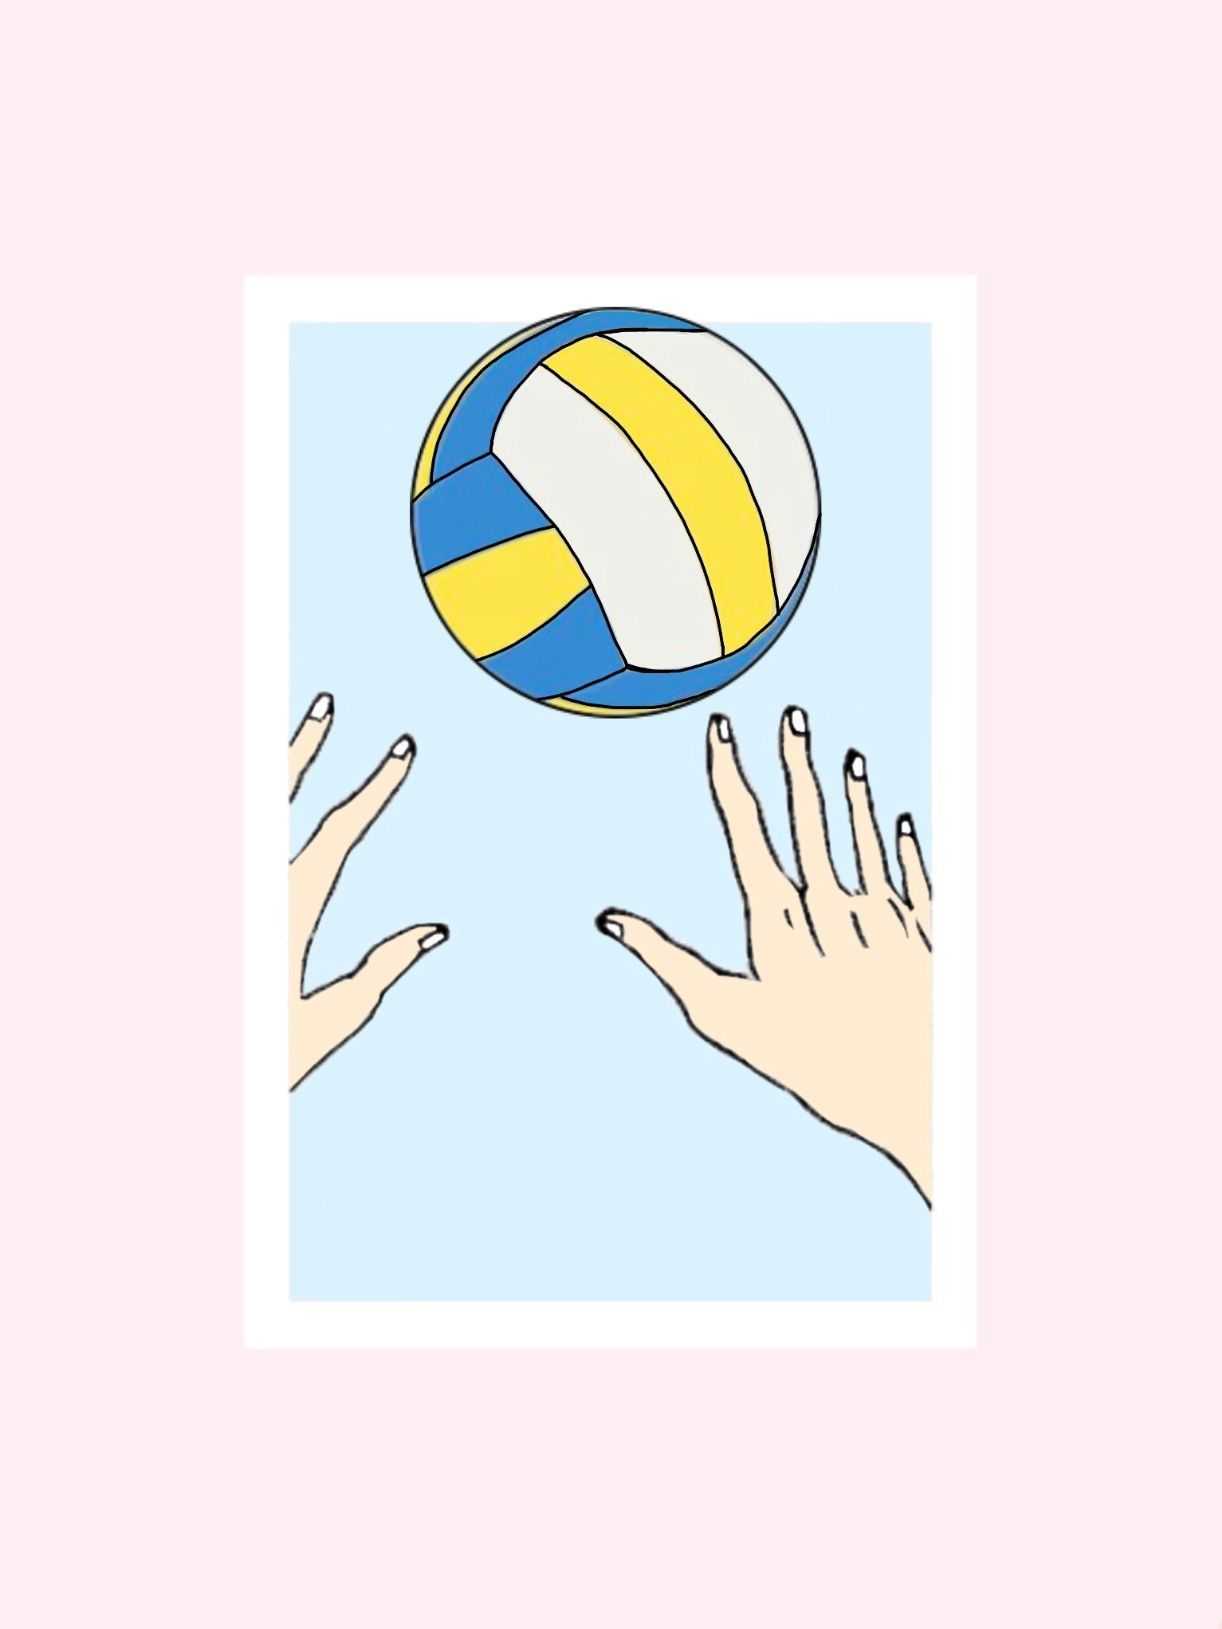 HD Volleyball Wallpaper Ixpap